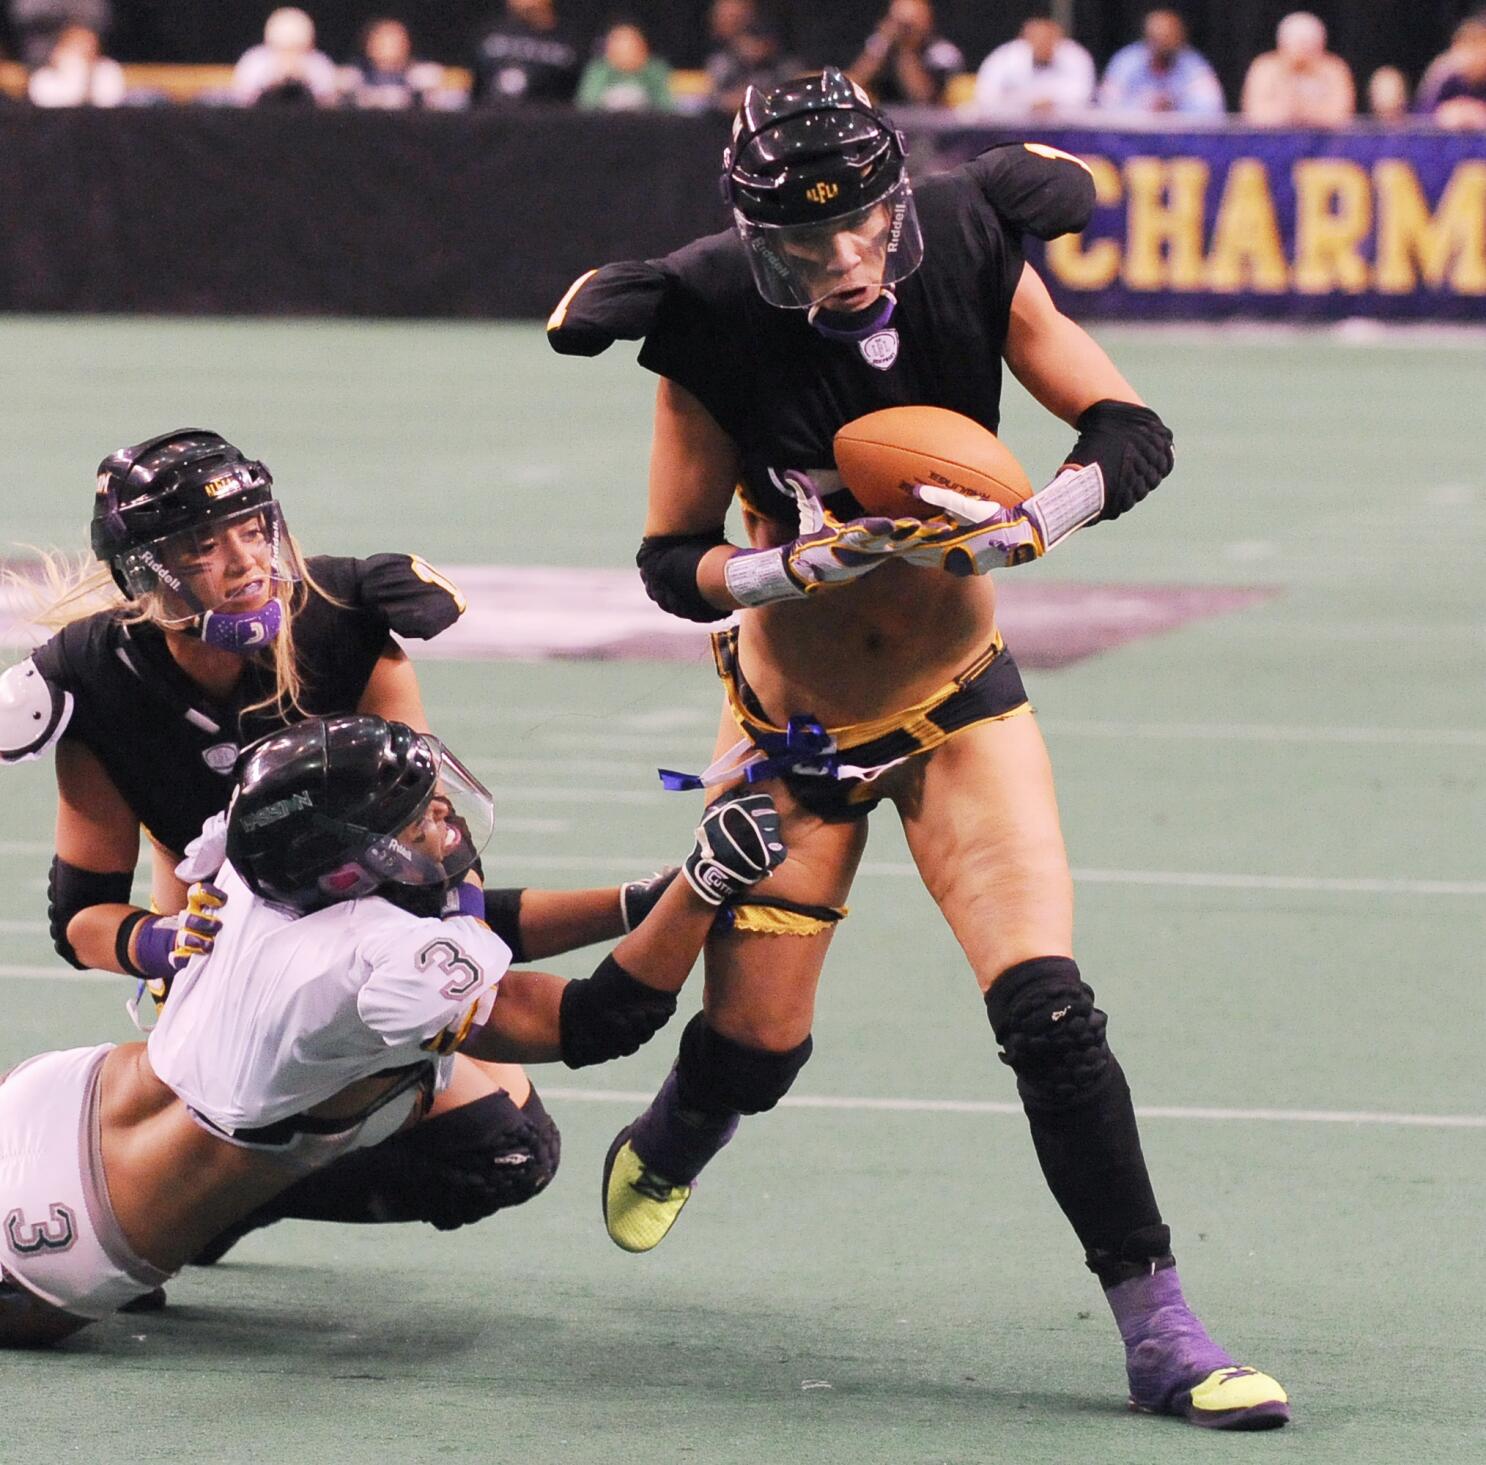 I Went to the Baltimore Charm Lingerie Football Game (Photos)